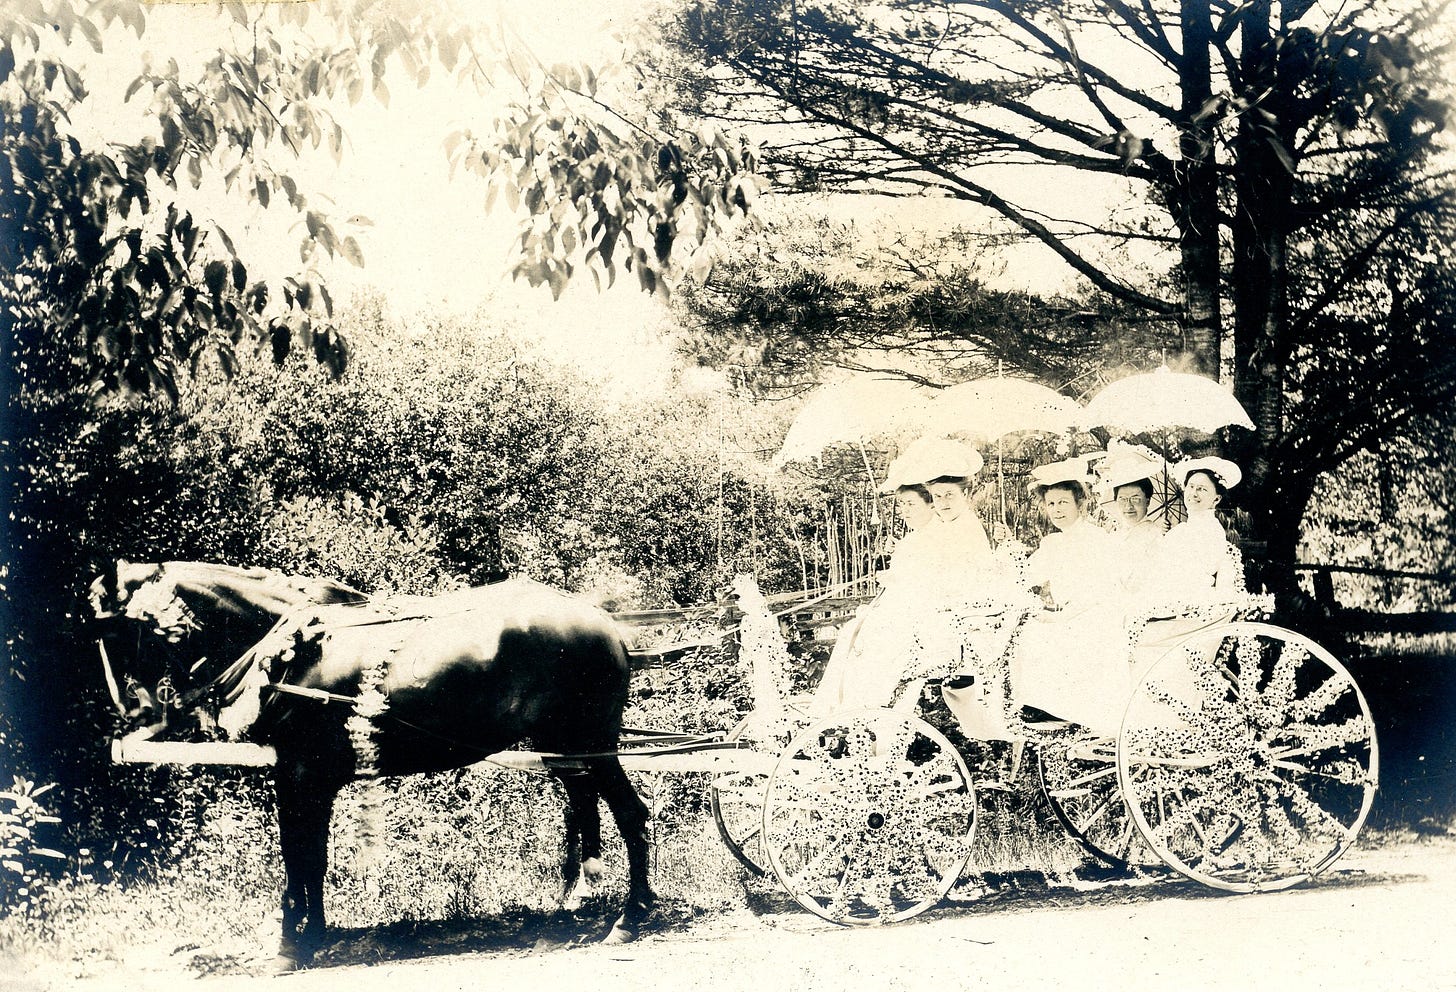 Five women with parasols on horse cart